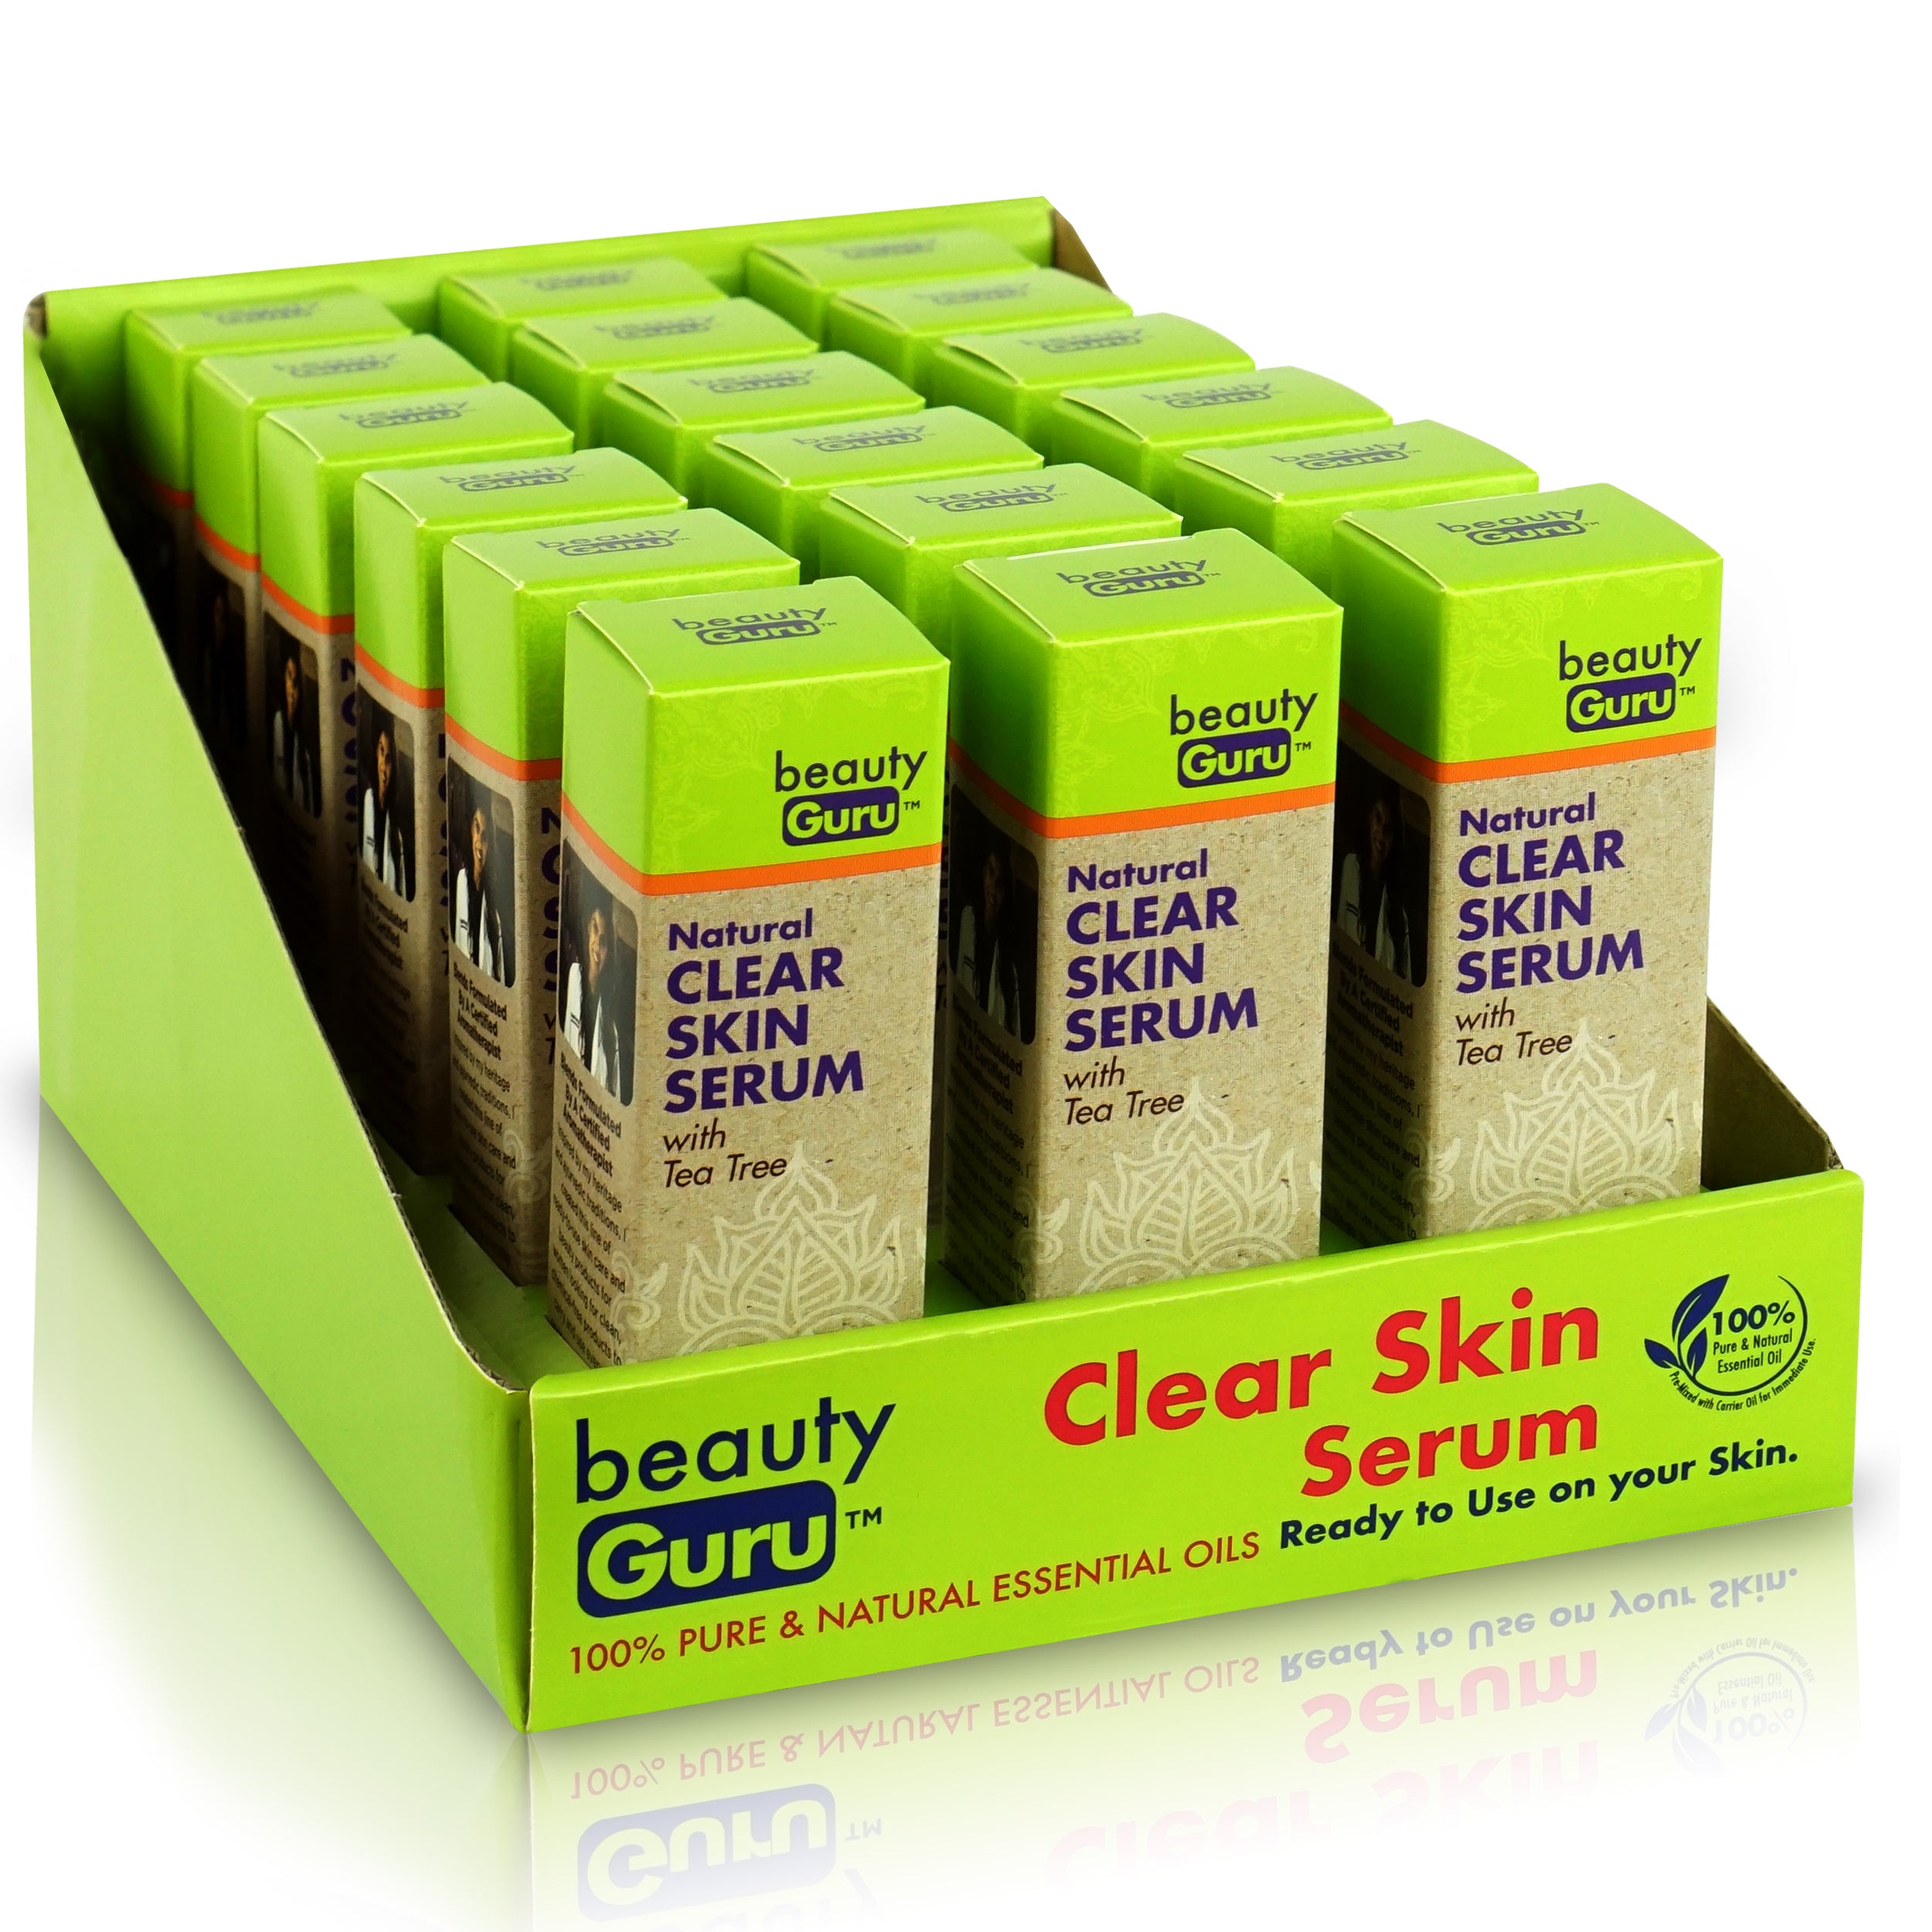 Clear Skin Serum (pack of 18)- Wholesale Only, Contact to Purchase